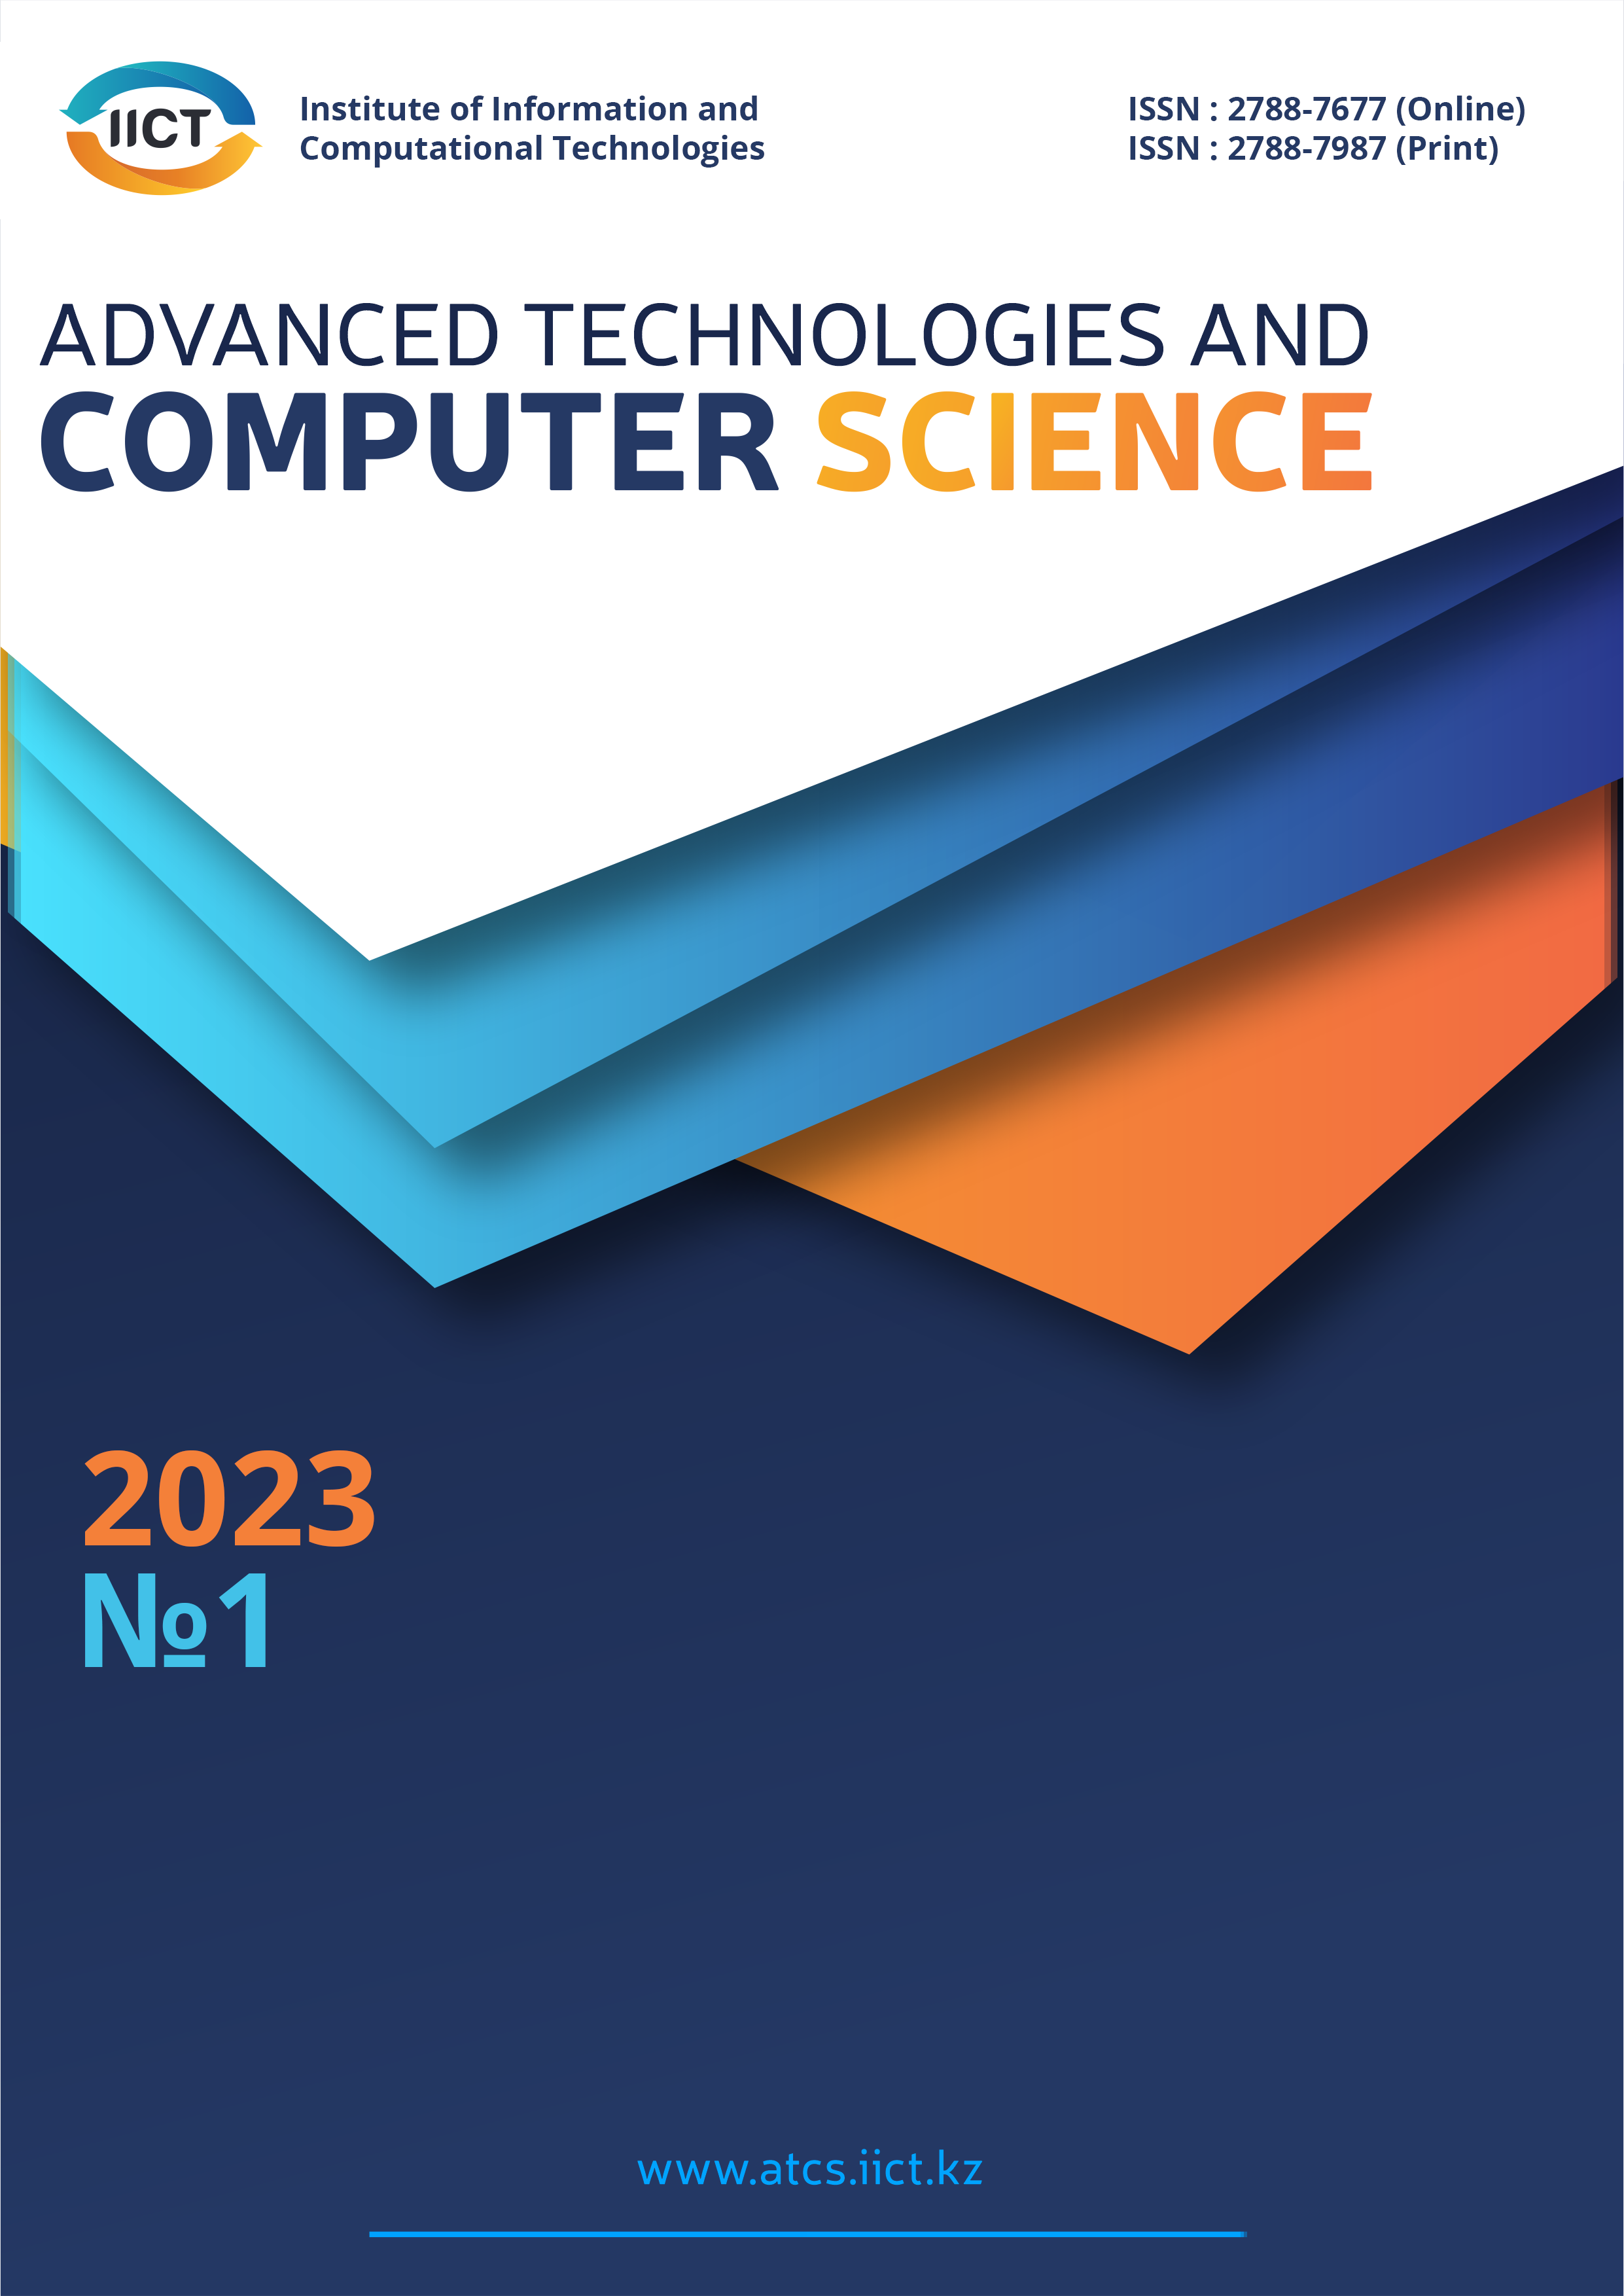 					View No. 1 (2023): ADVANCED TECHNOLOGIES AND COMPUTER SCIENCE
				